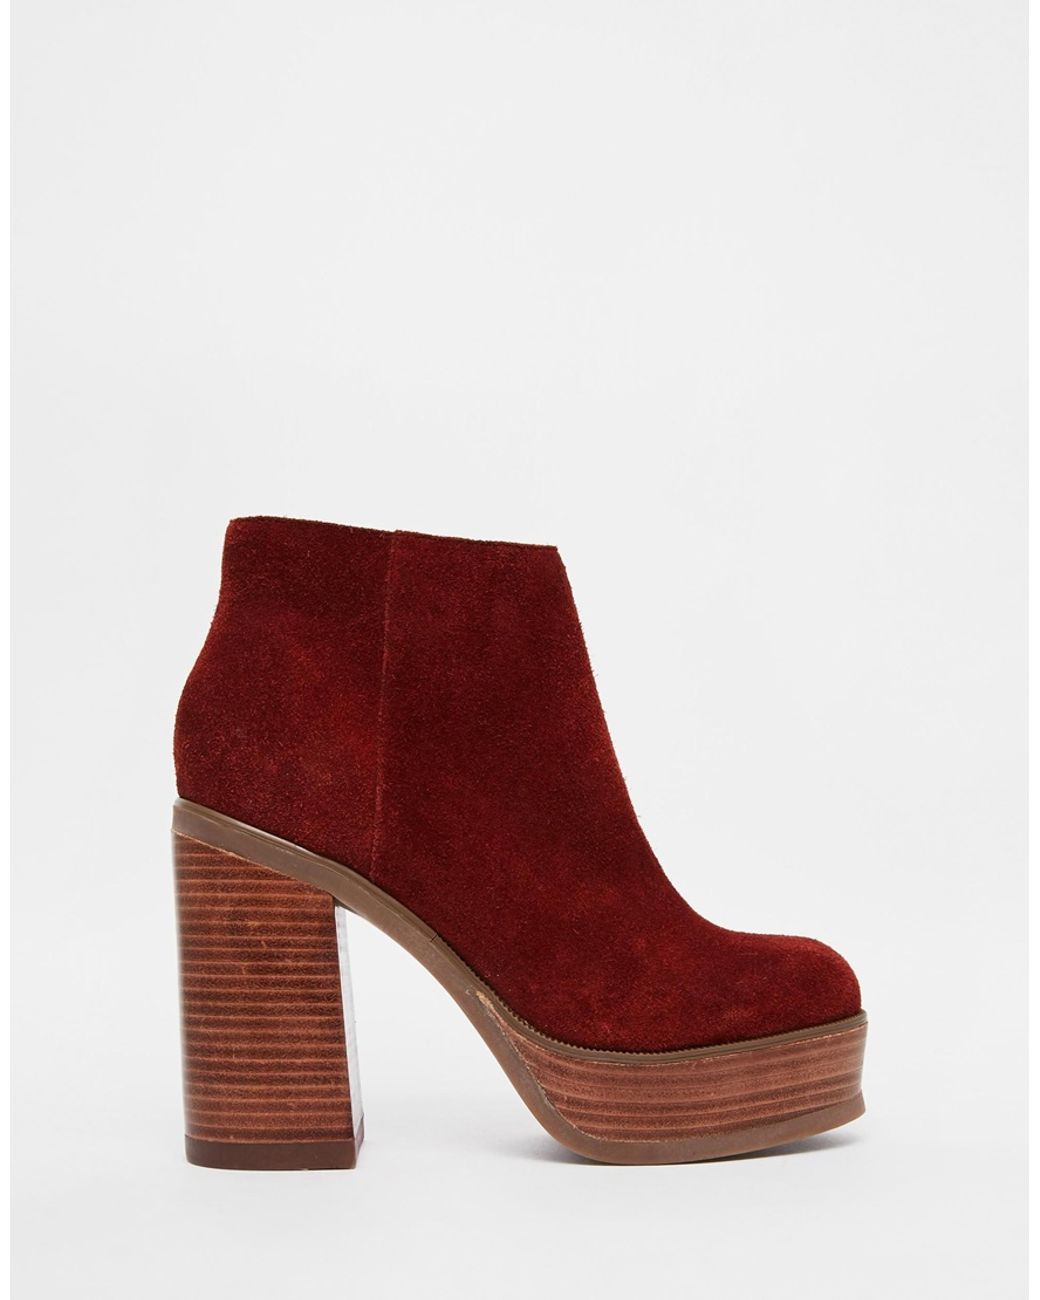 ASOS Expression 70s Suede Platform Ankle Boots in Brown | Lyst